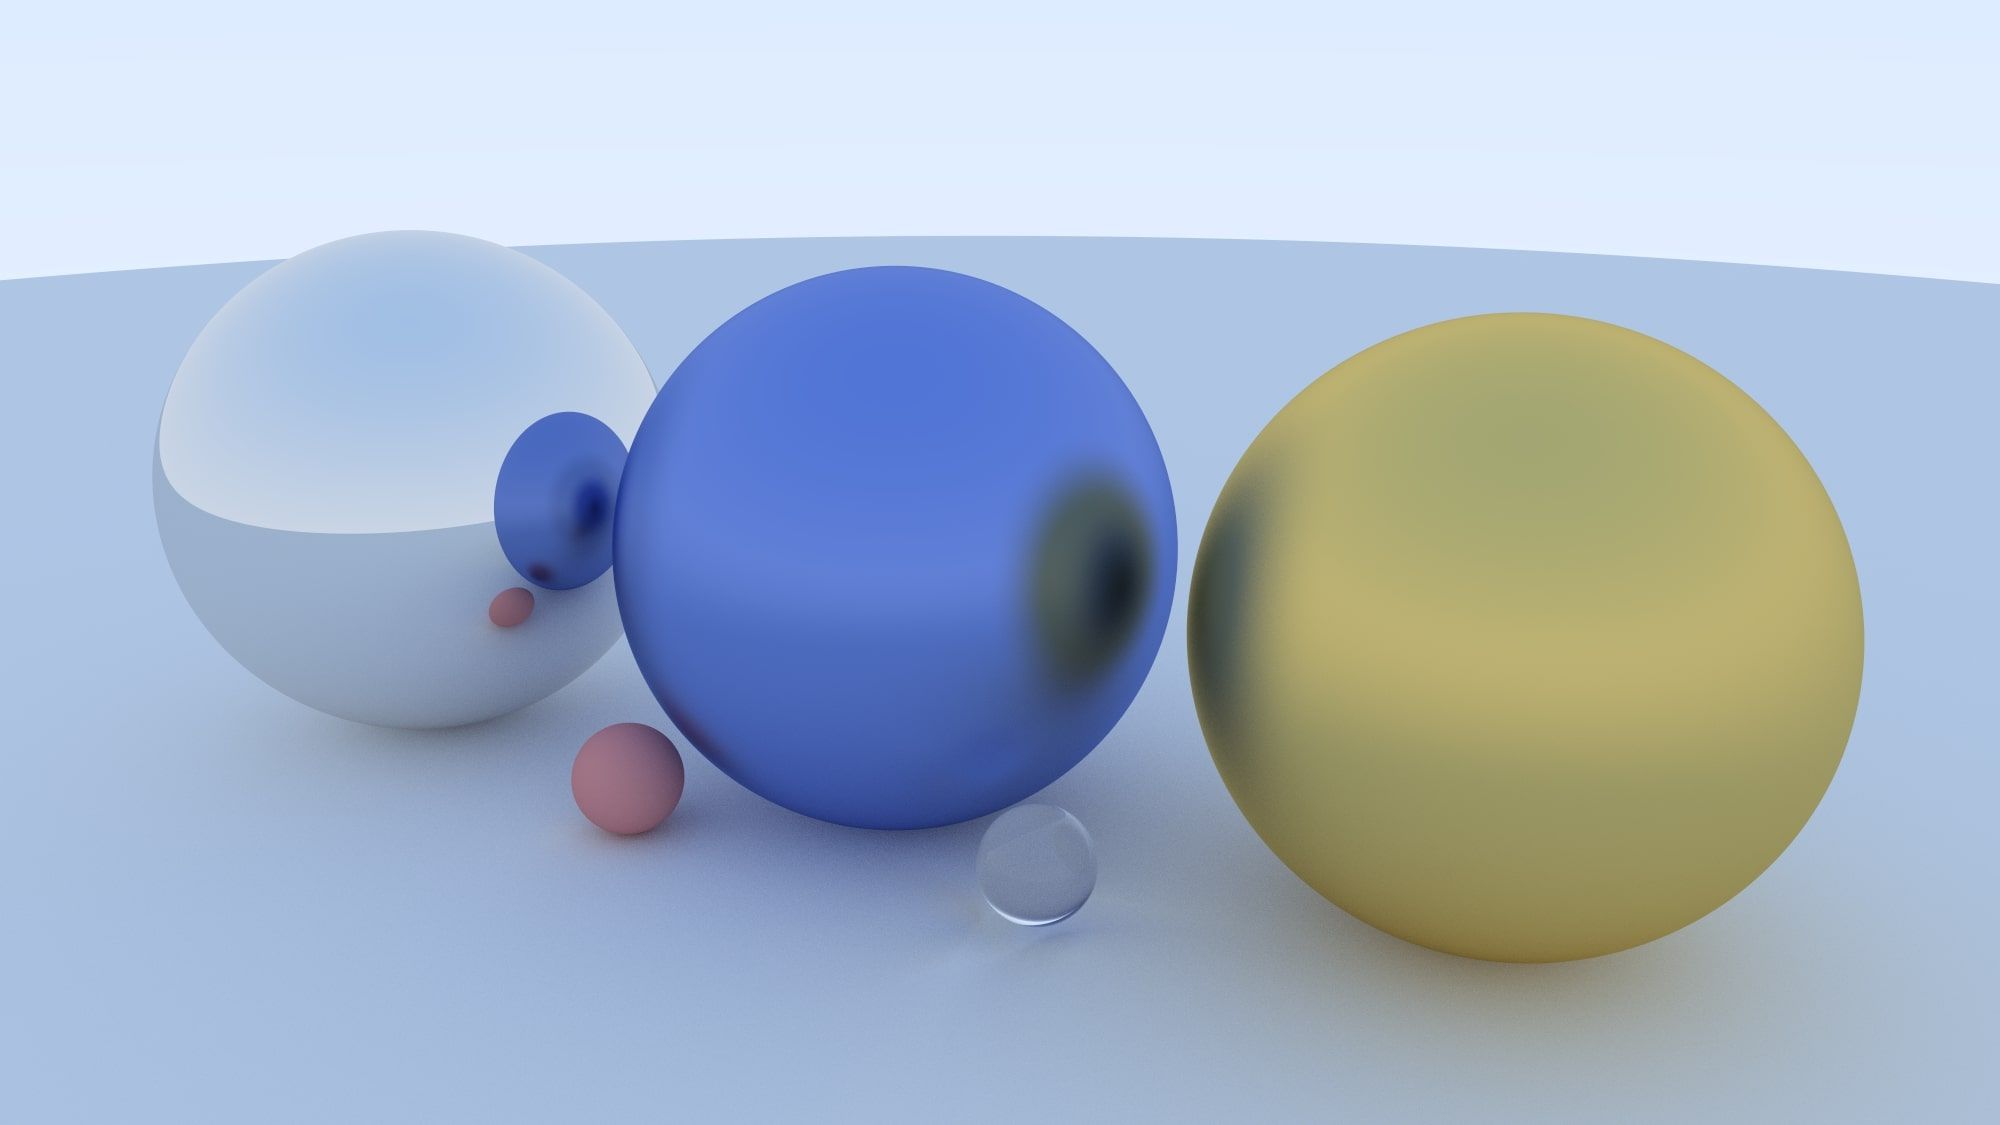 Ray tracer example image with different materials